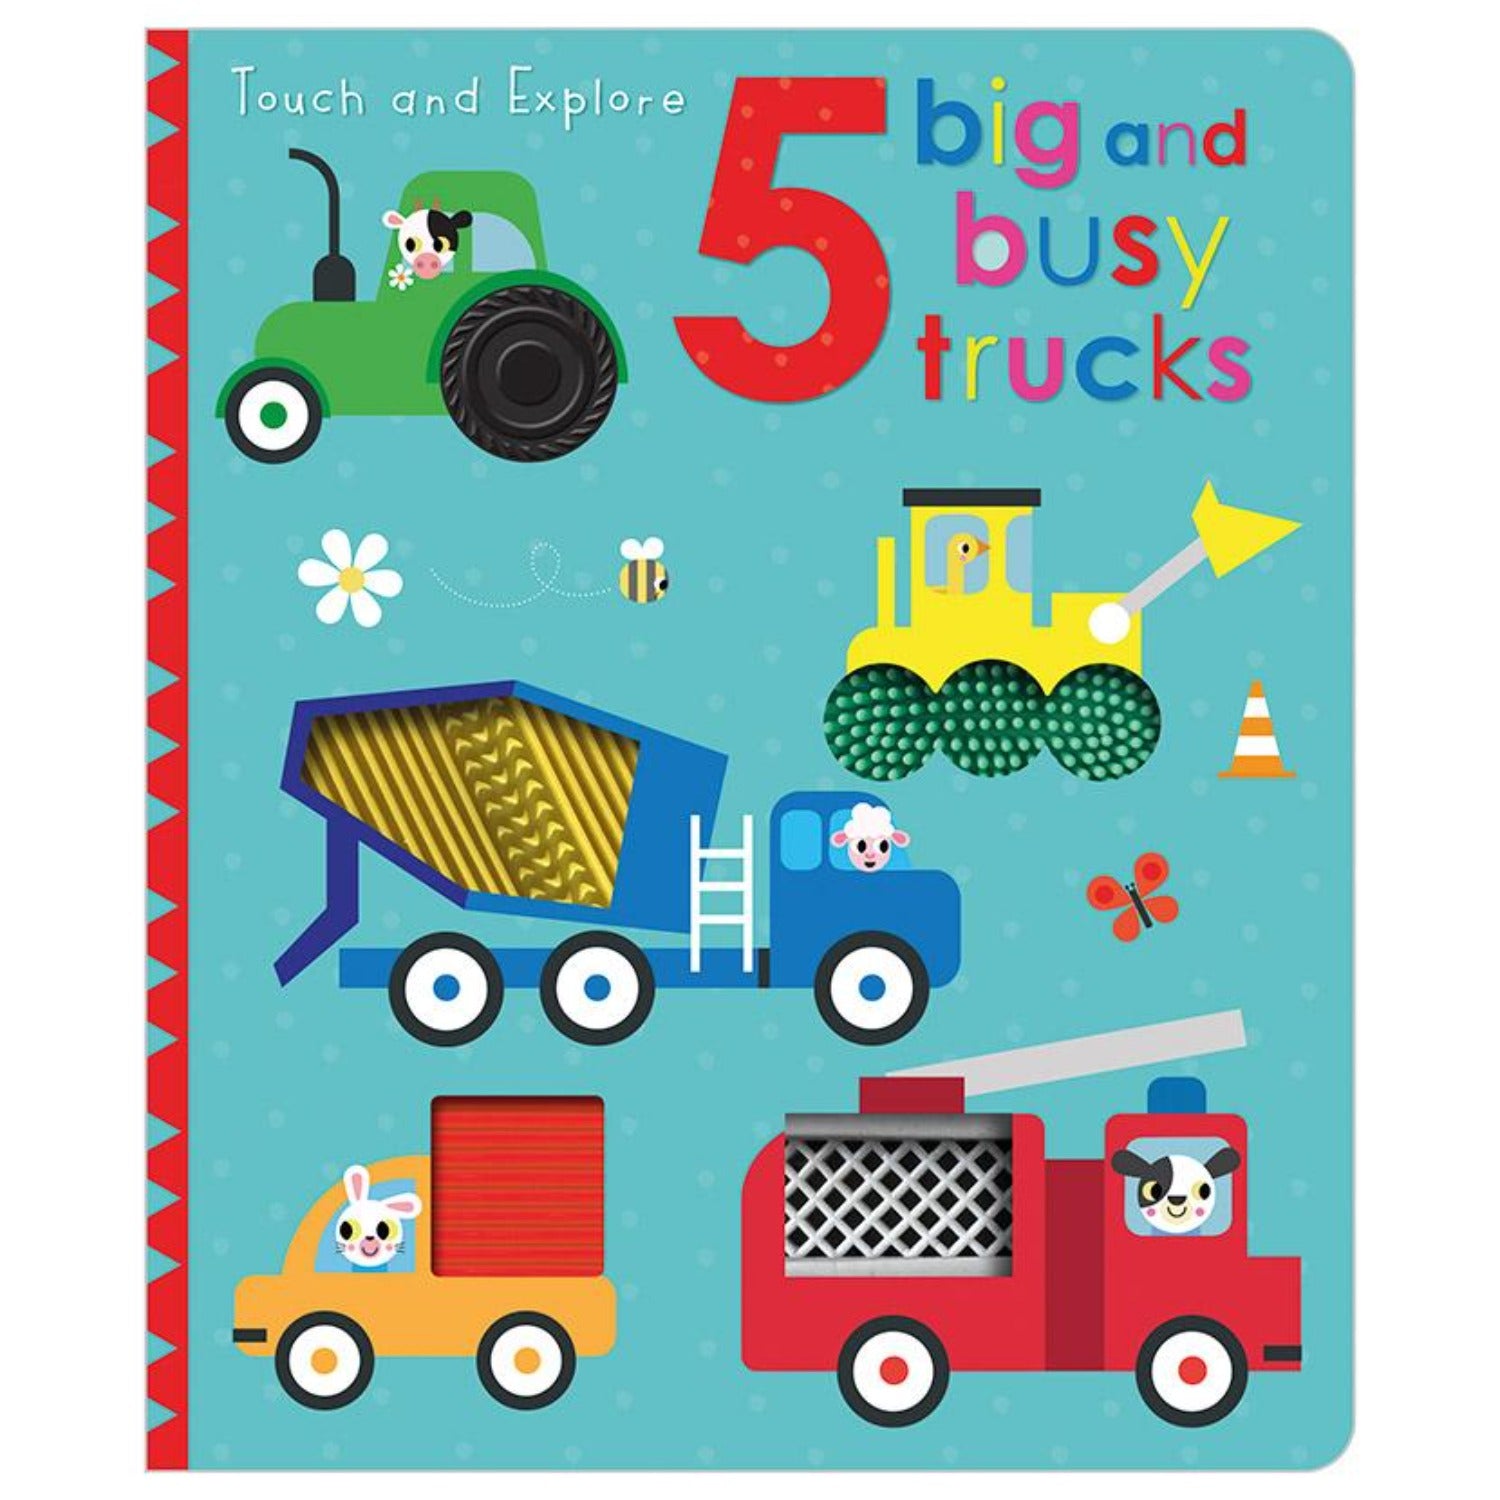 touch and feel book about trucks aimed at babies and toddlers. Suitable from birth